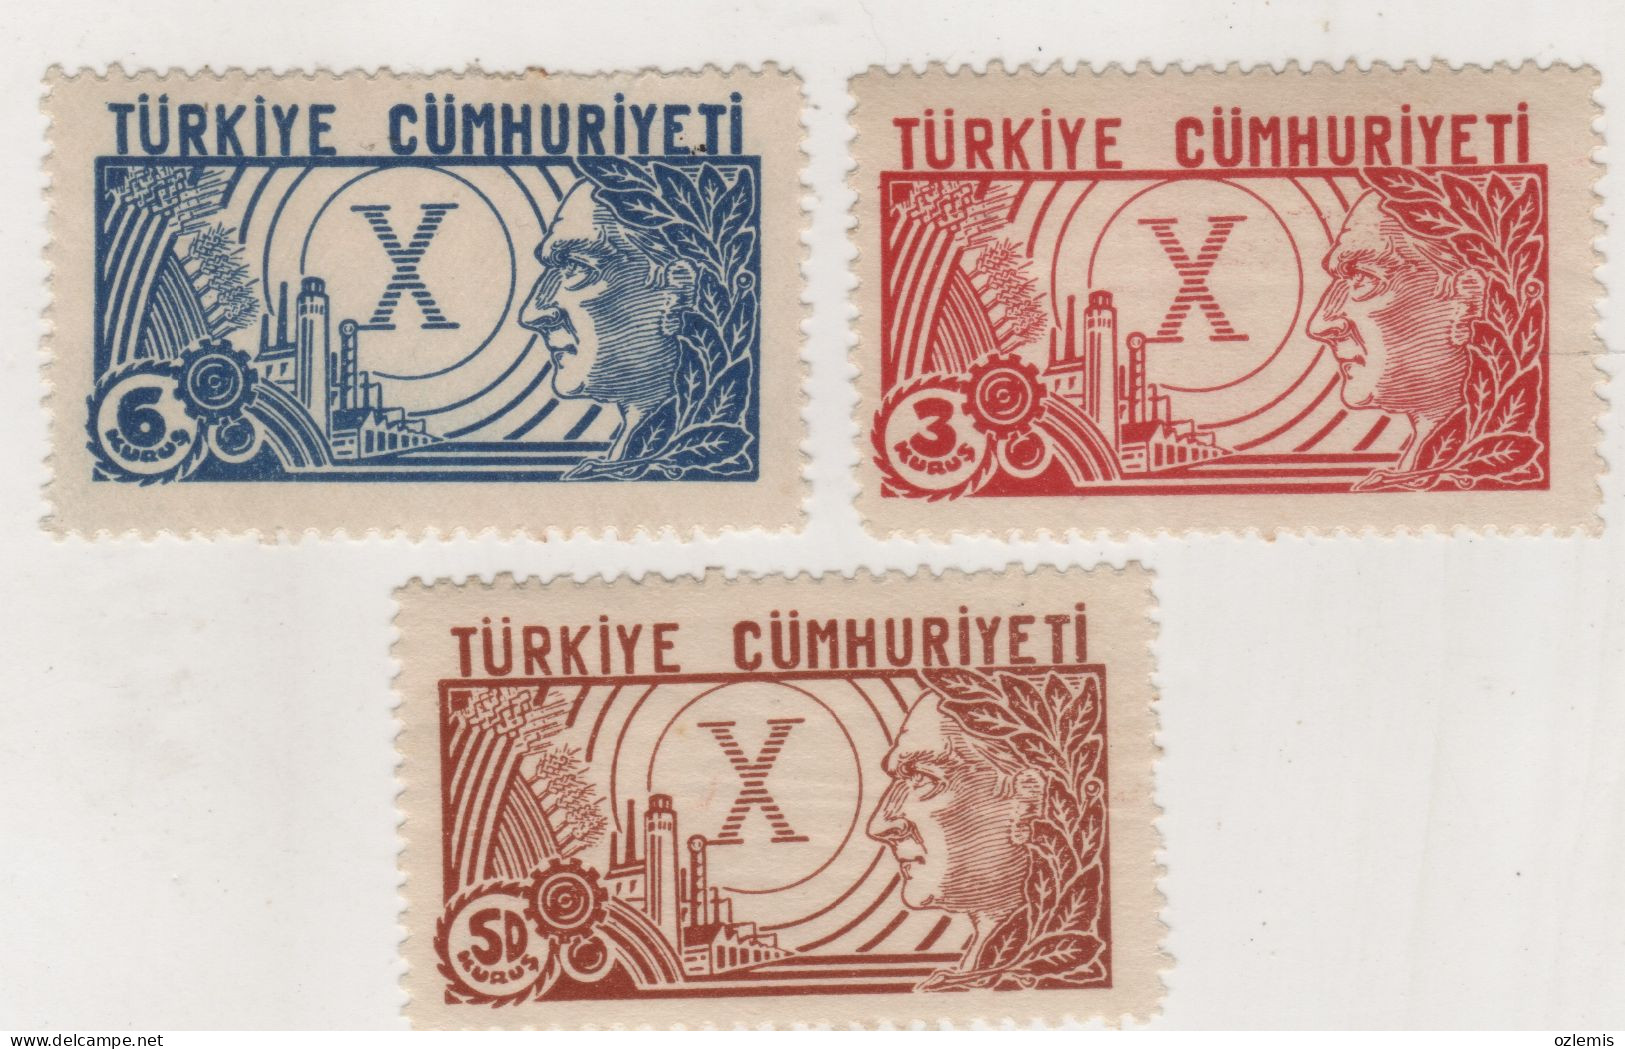 TURKEY,TURKEI,TURQUIE ,1933 ,COMMEMORATIVE STAMPS FOR THE 100TH ANIVERSARY OF THE REPUBLIC,,,STAMP,MNH - Nuovi